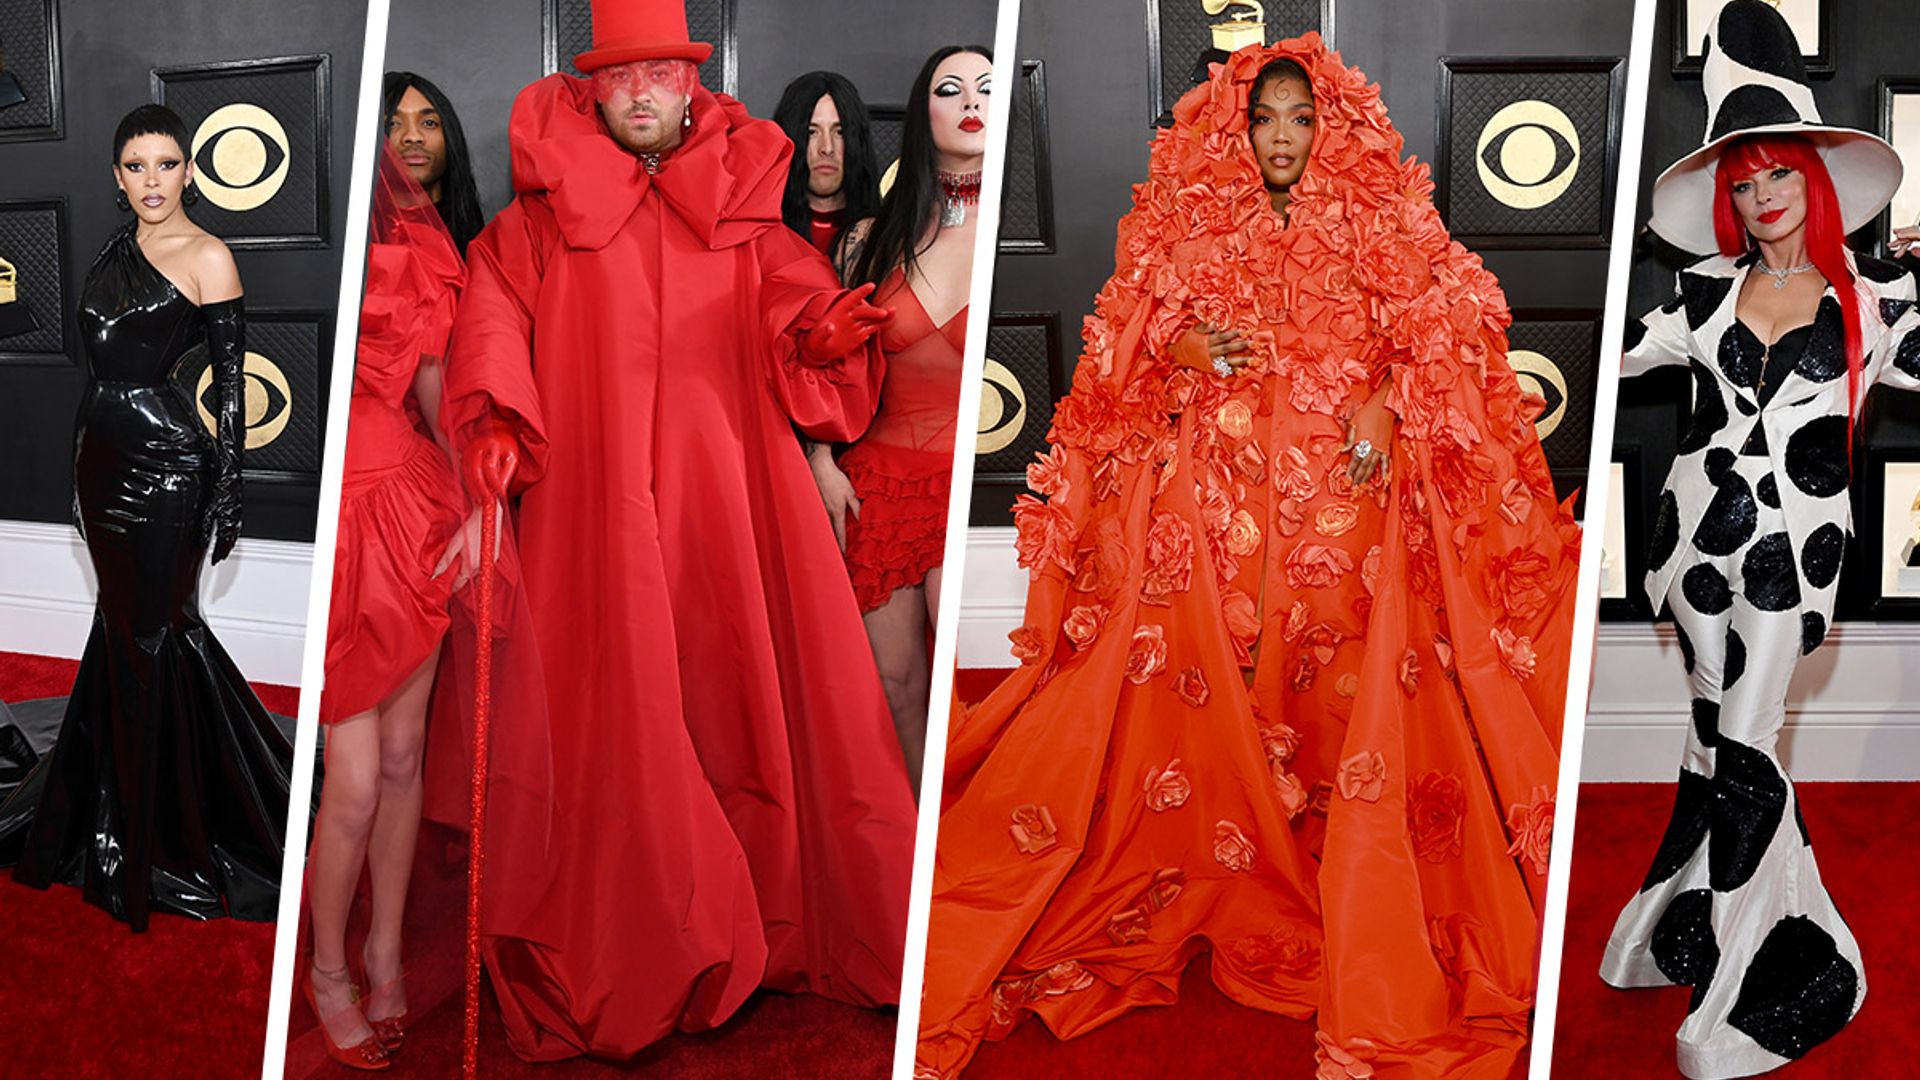 Grammys 2023 All the jawdropping red carpet looks from Lizzo, Shania